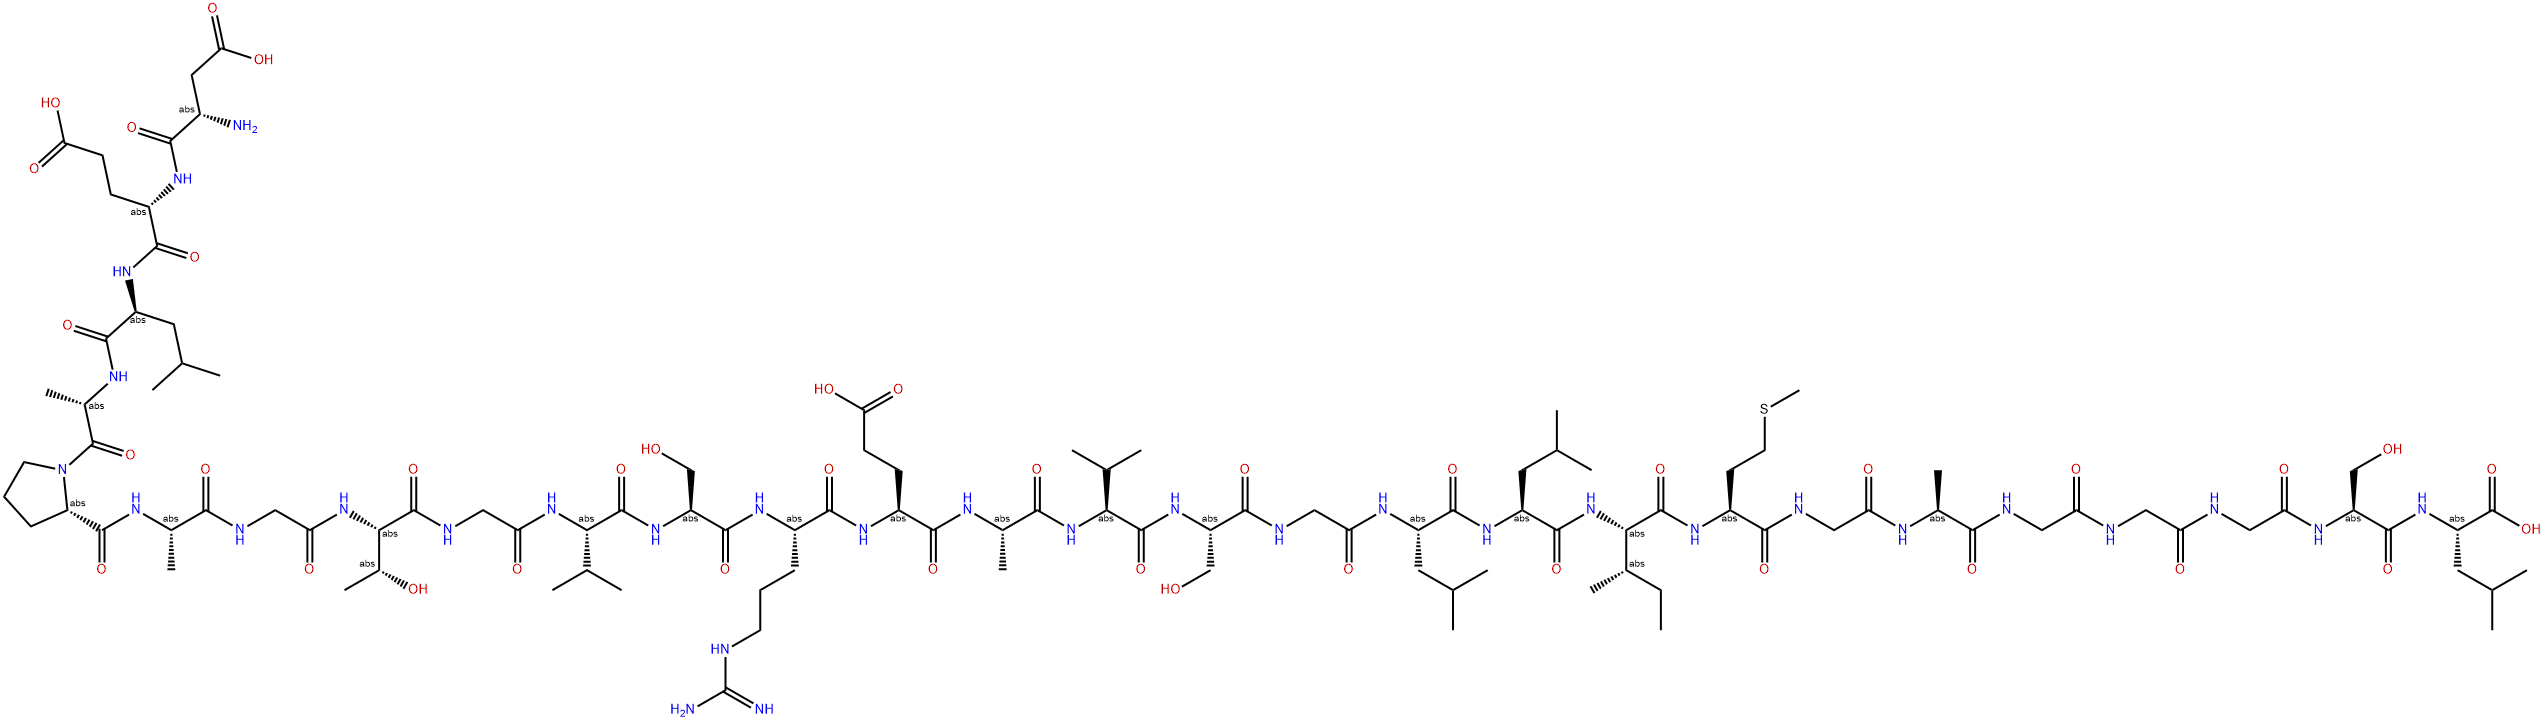 APLP1-derived Ab-like peptide (1-28) Structure